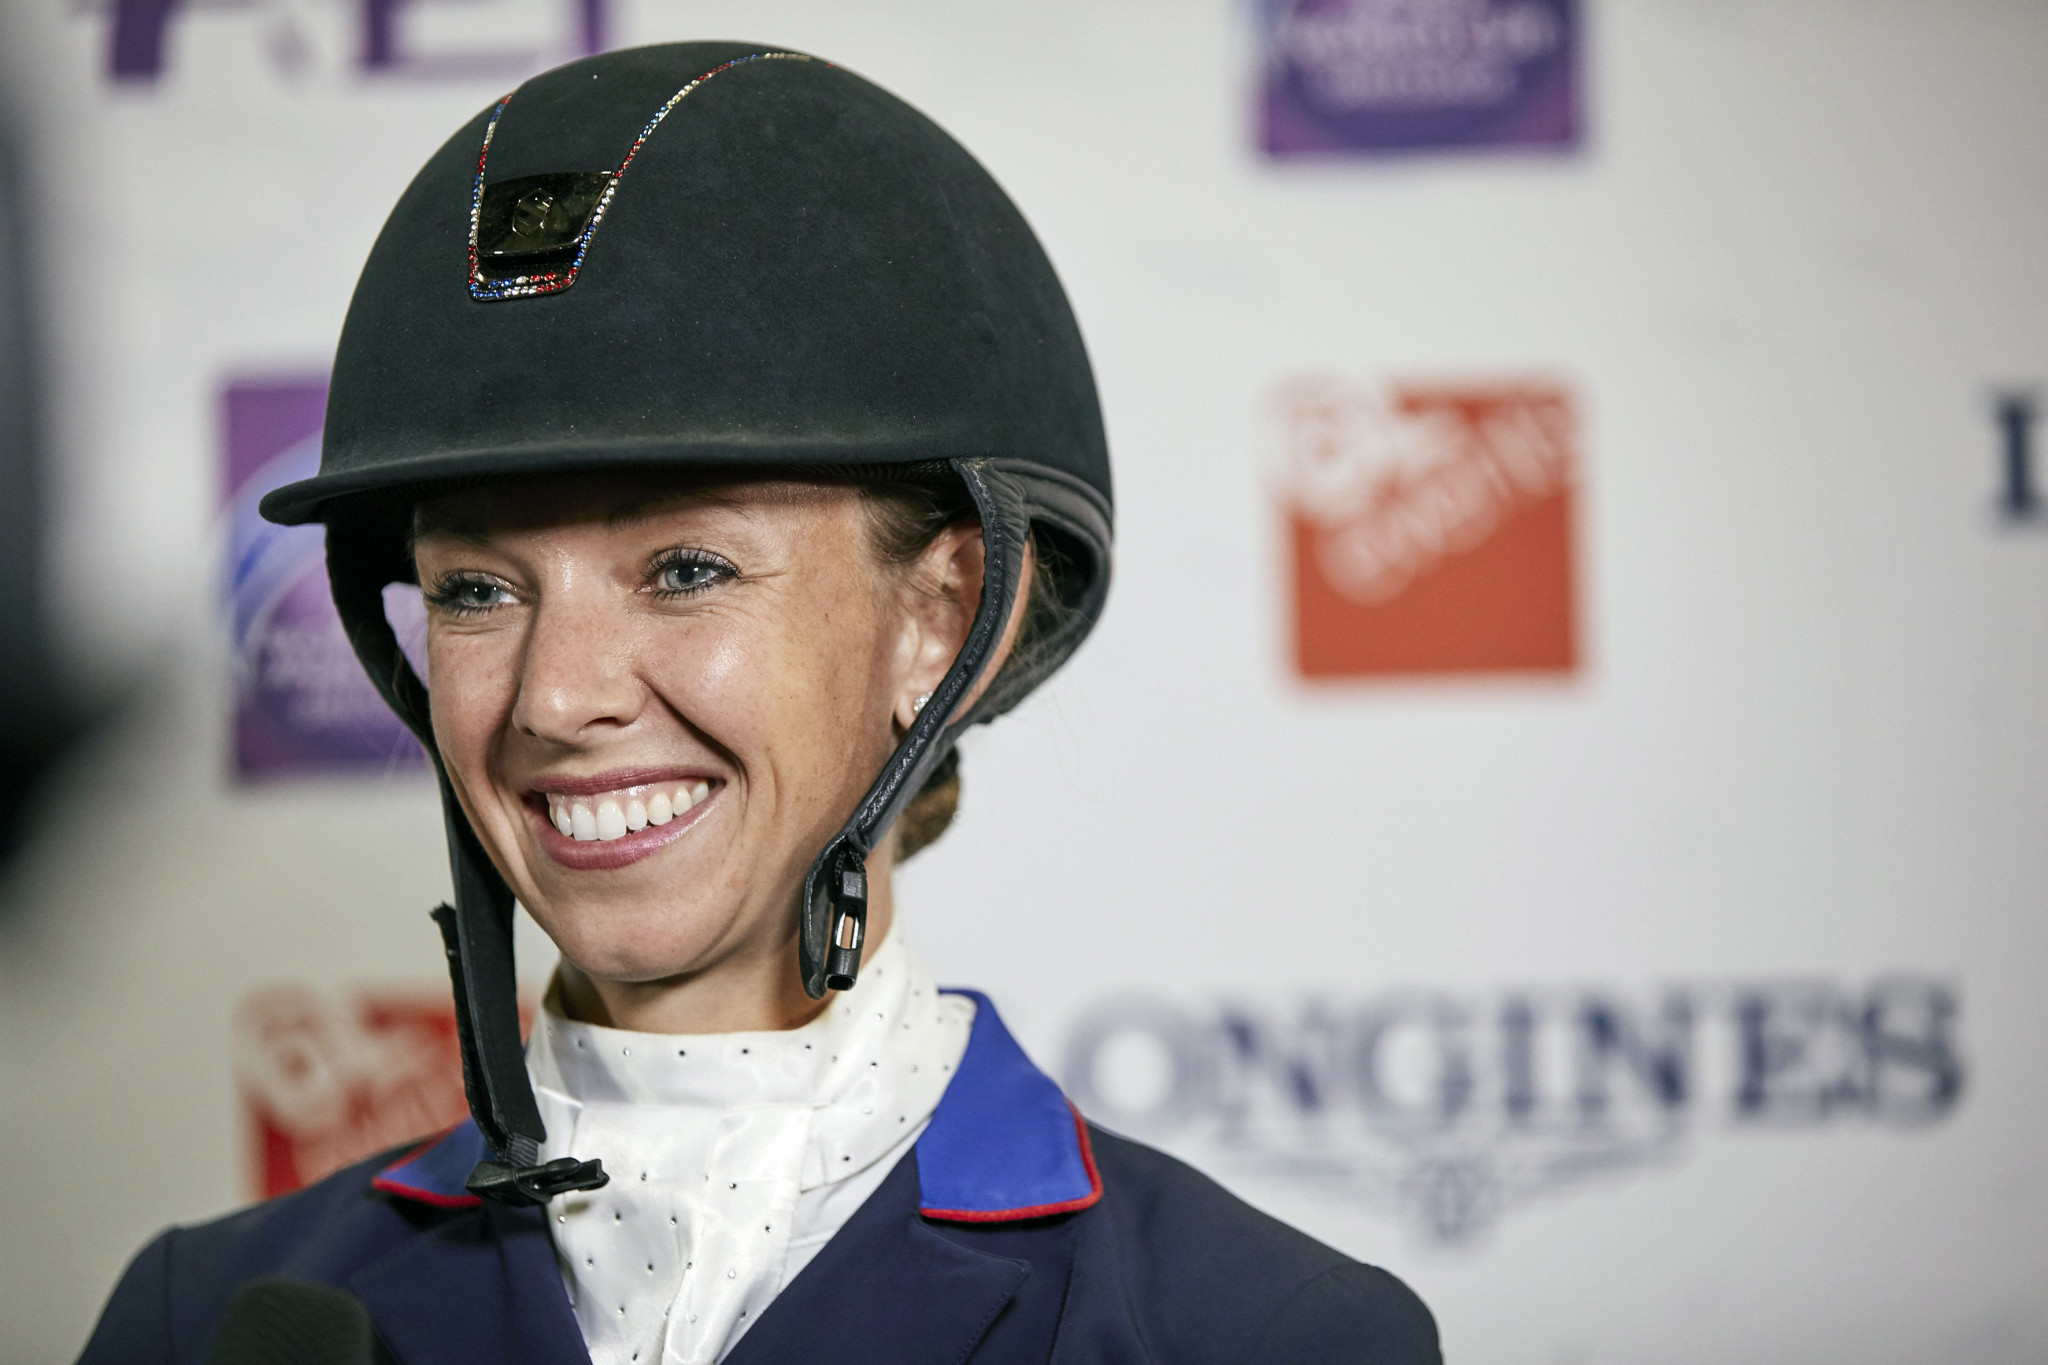  Graves gets her nose in front of Werth at halfway point of FEI World Cup Dressage Final in Paris